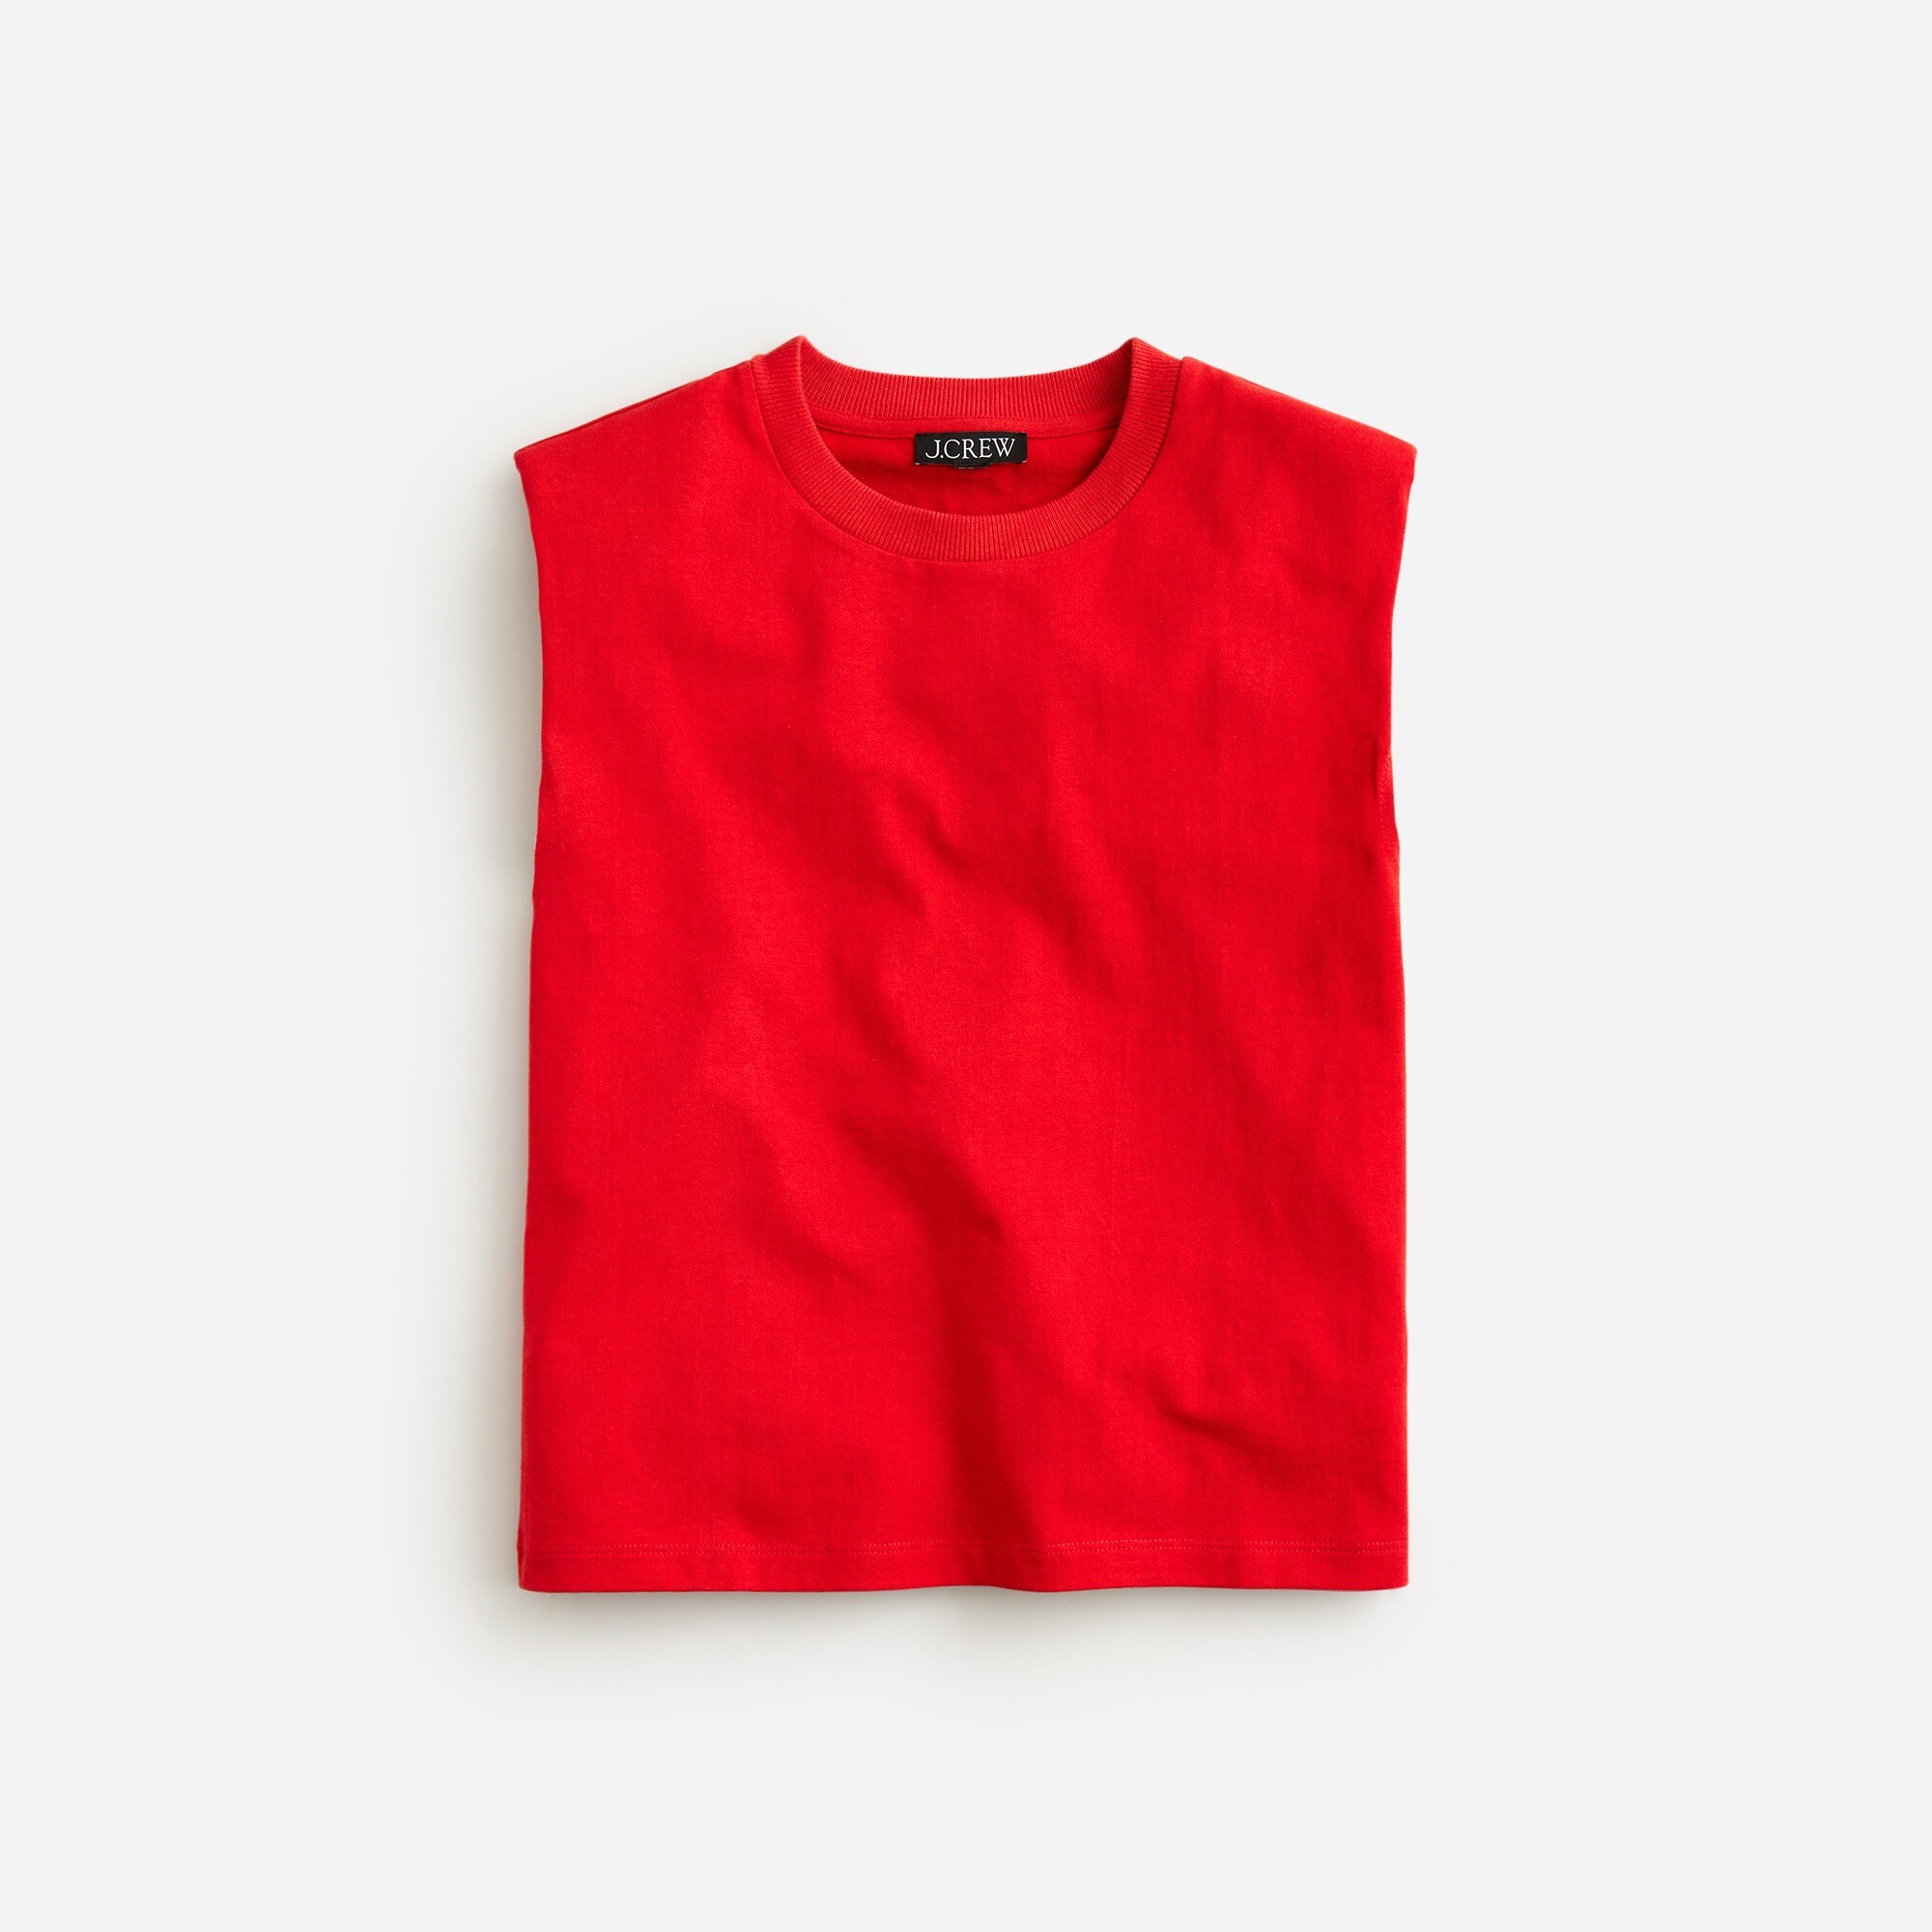  Structured muscle T-shirt in mariner cotton